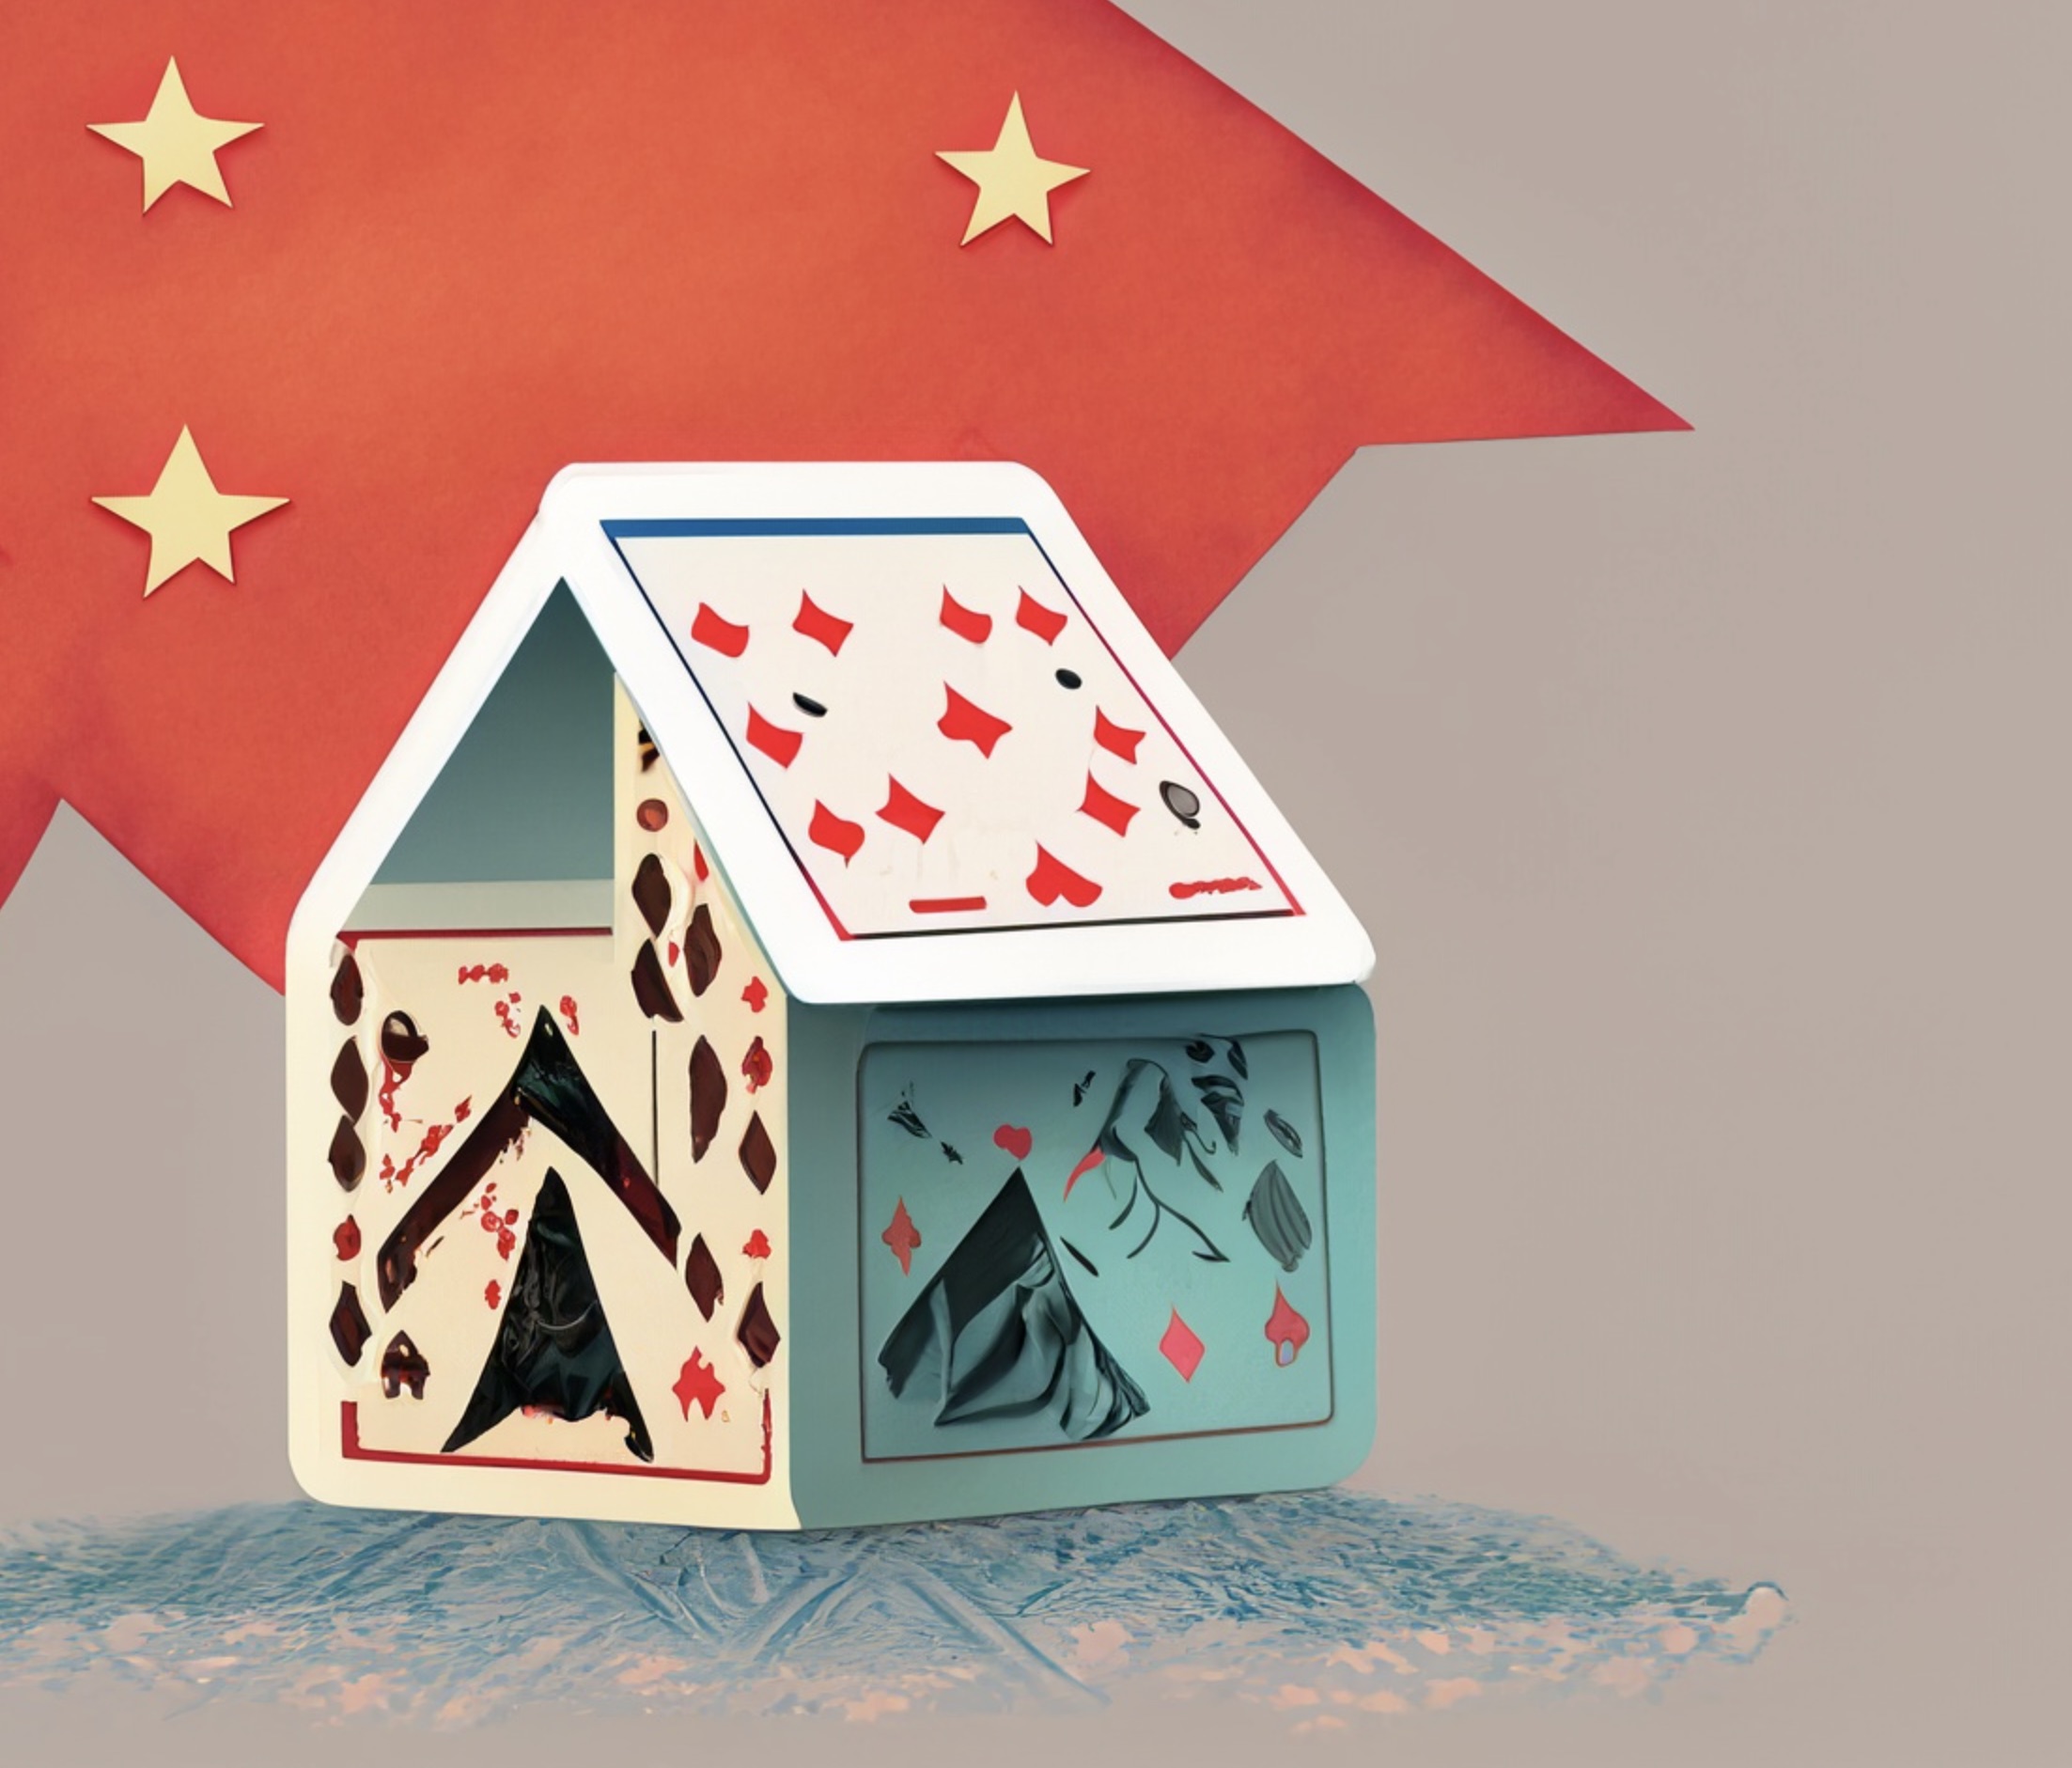 China's economy: House of Cards  waiting to happen